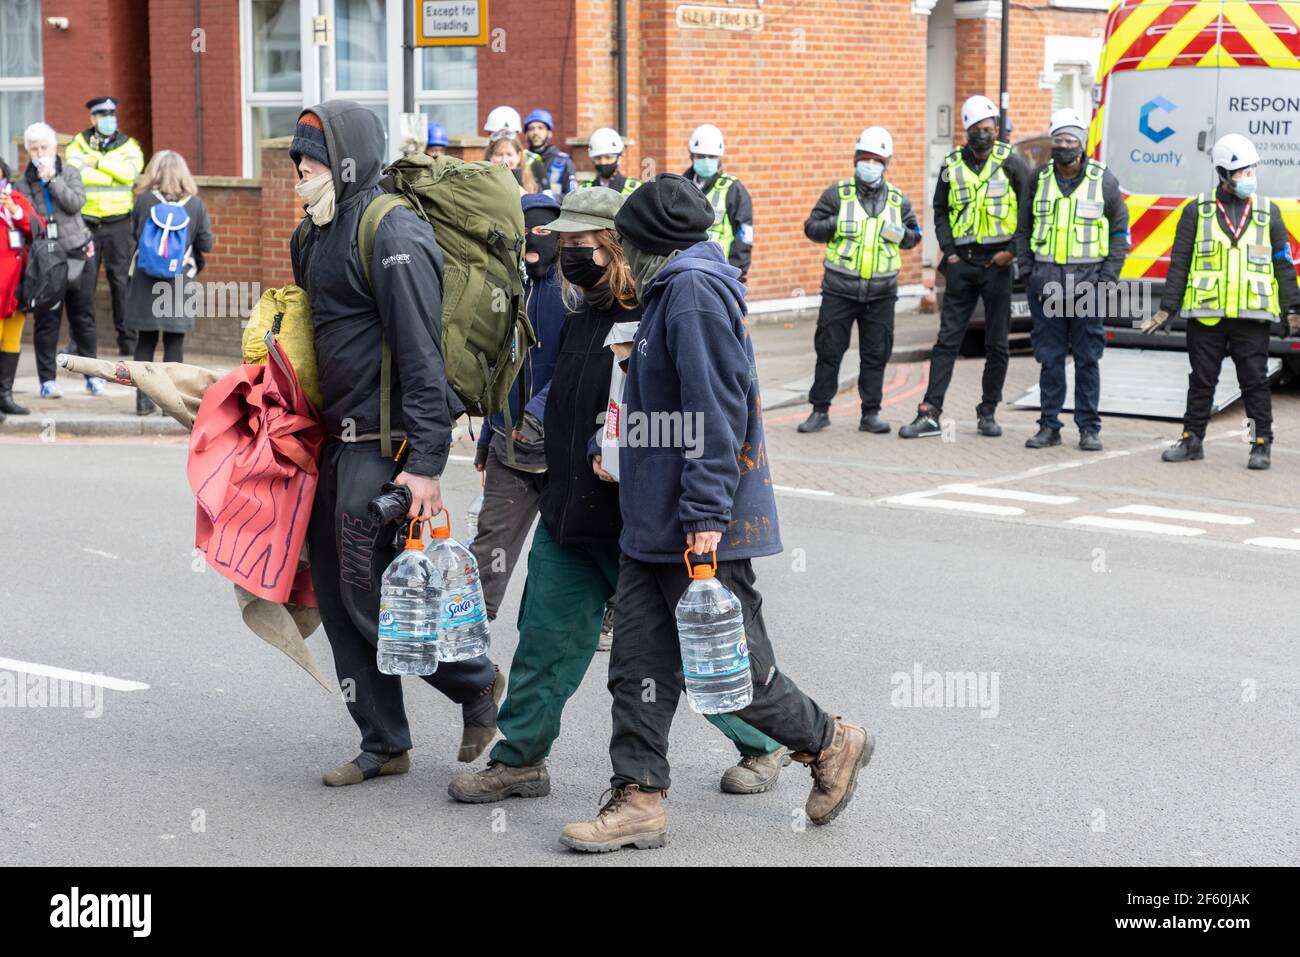 London, United Kingdom. 29th Mar, 2021. Evicted protesters leave the premises. The police station had been occupied by squatters and autonomous activists under the name of ‘Not A Cop Shop’ for over a week, in opposition to the new ‘Police, Crime, Sentencing, and Courts Bill’ and femicide. Cavendish Road Police Station, Clapham, London, United Kingdom. Credit: Joshua Windsor/Alamy Live News. Stock Photo